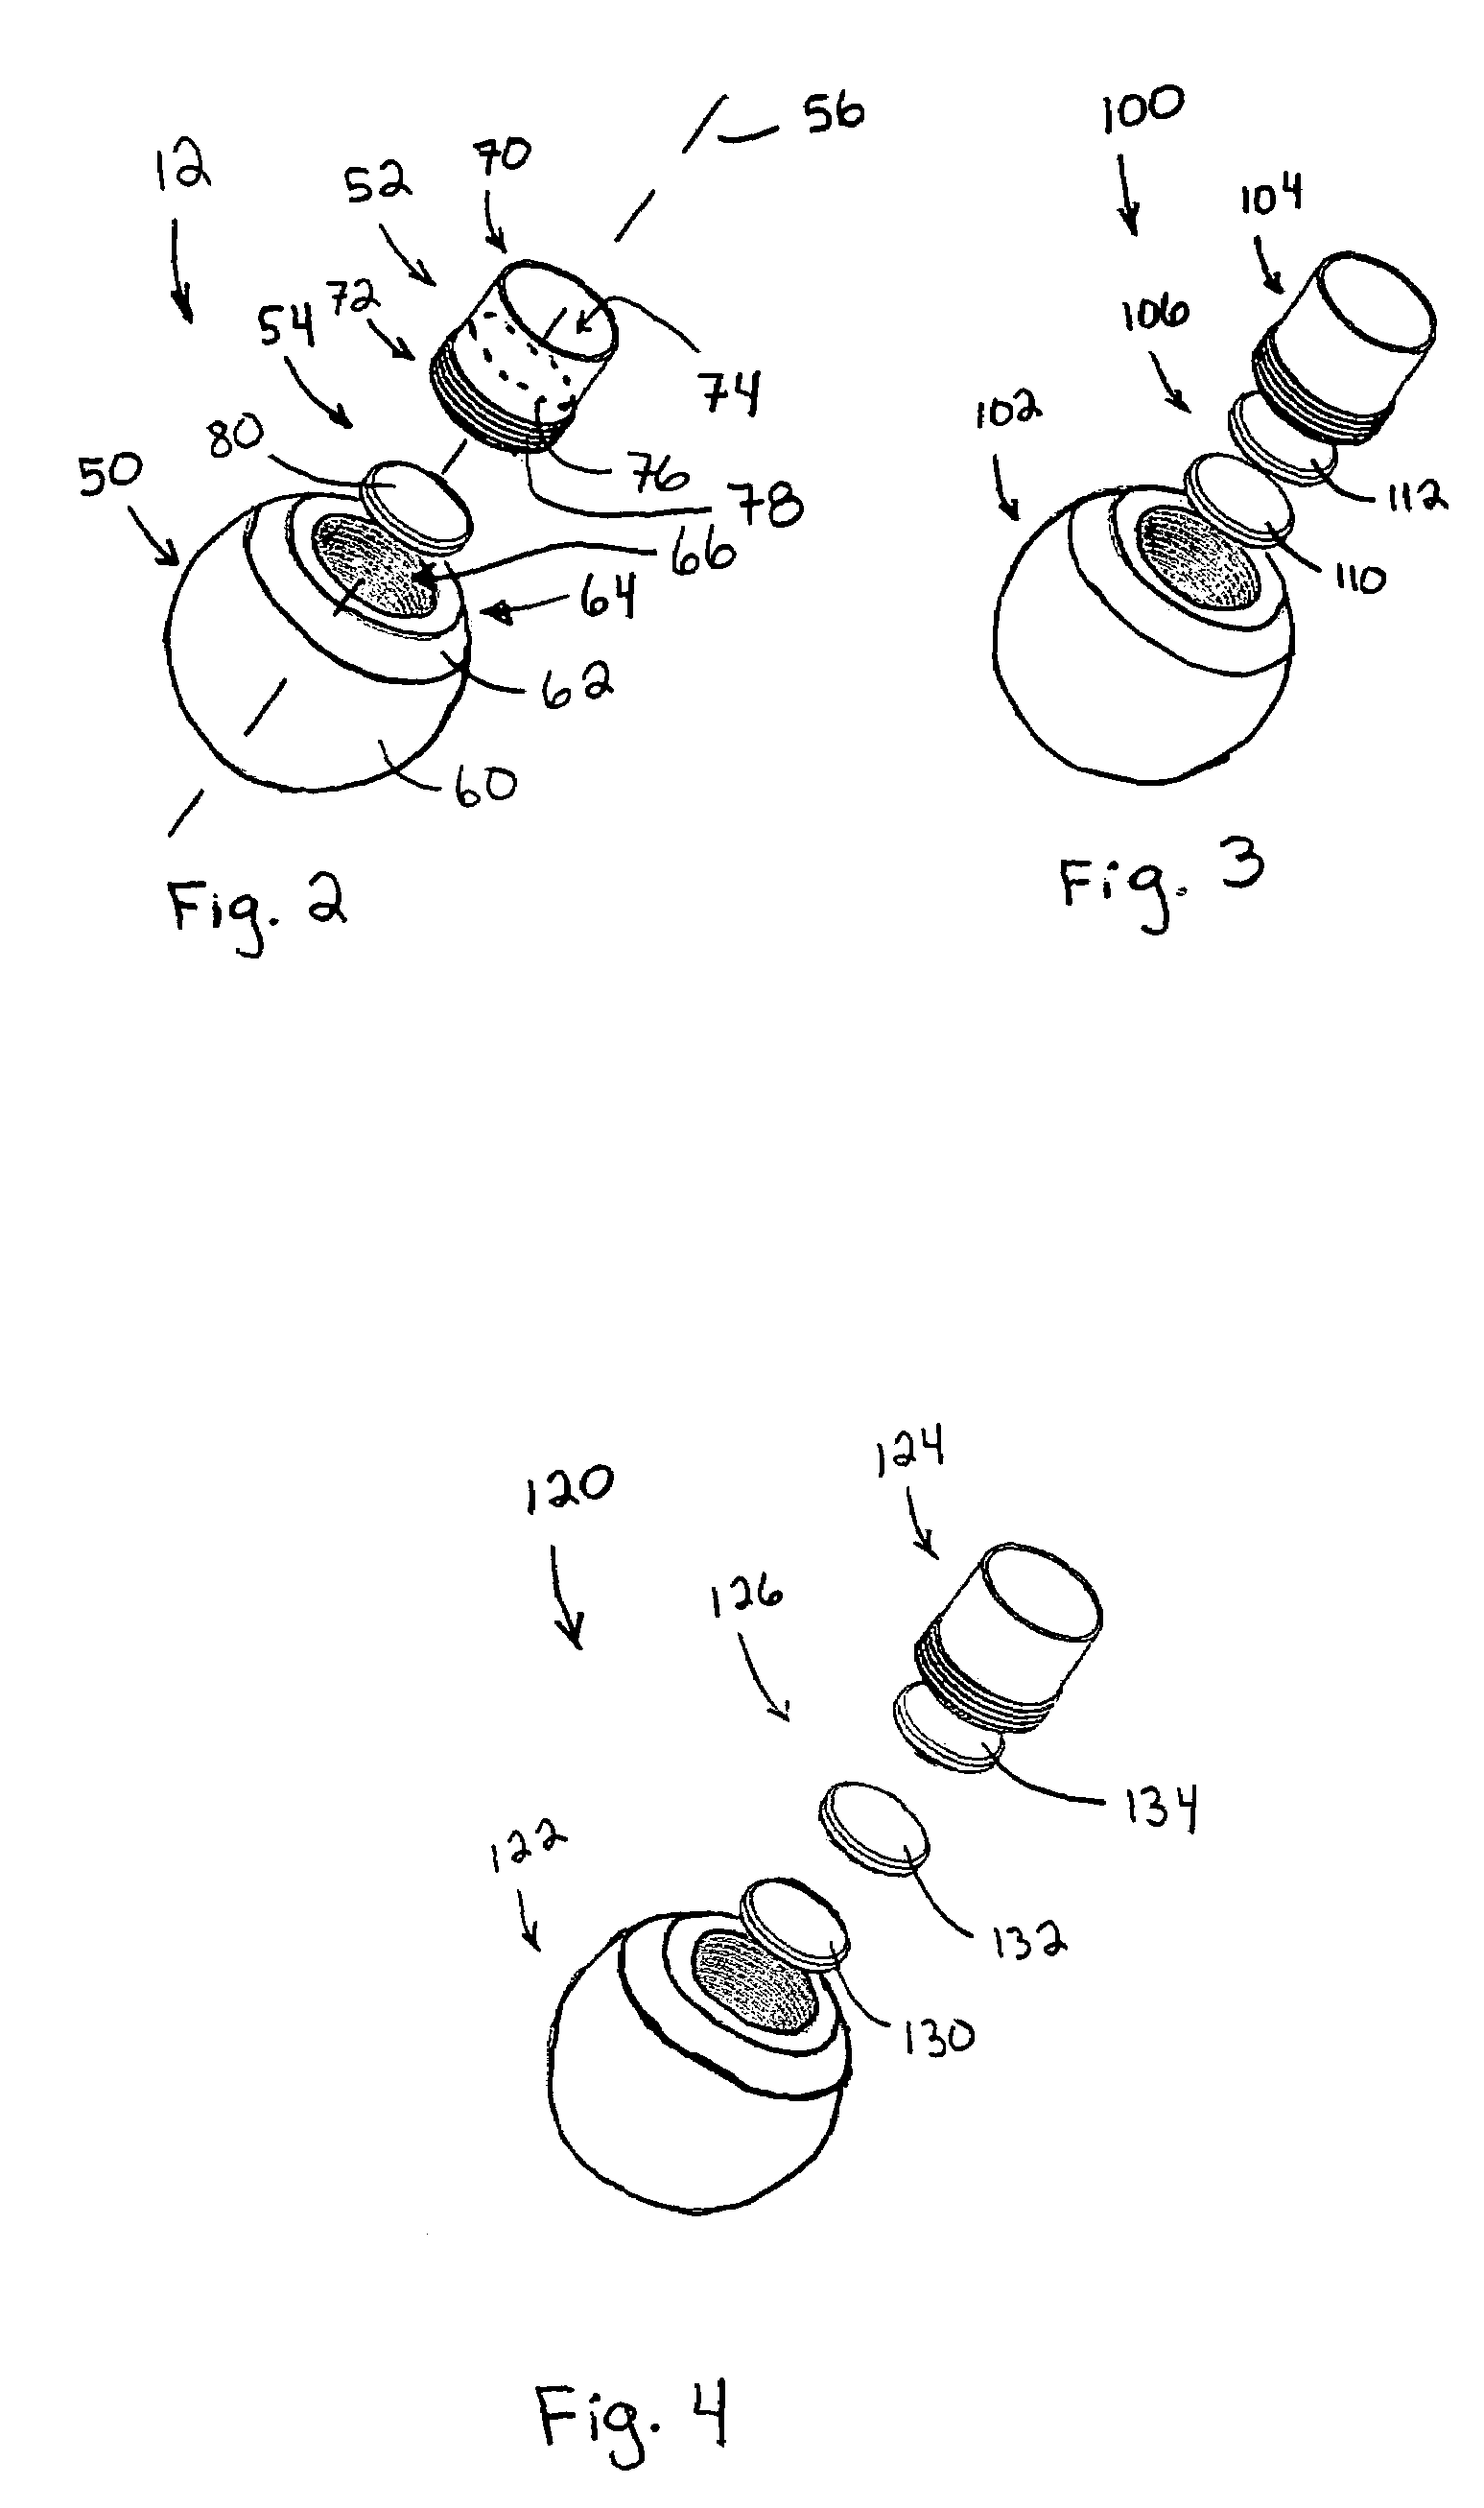 Femoral head assembly with variable offset